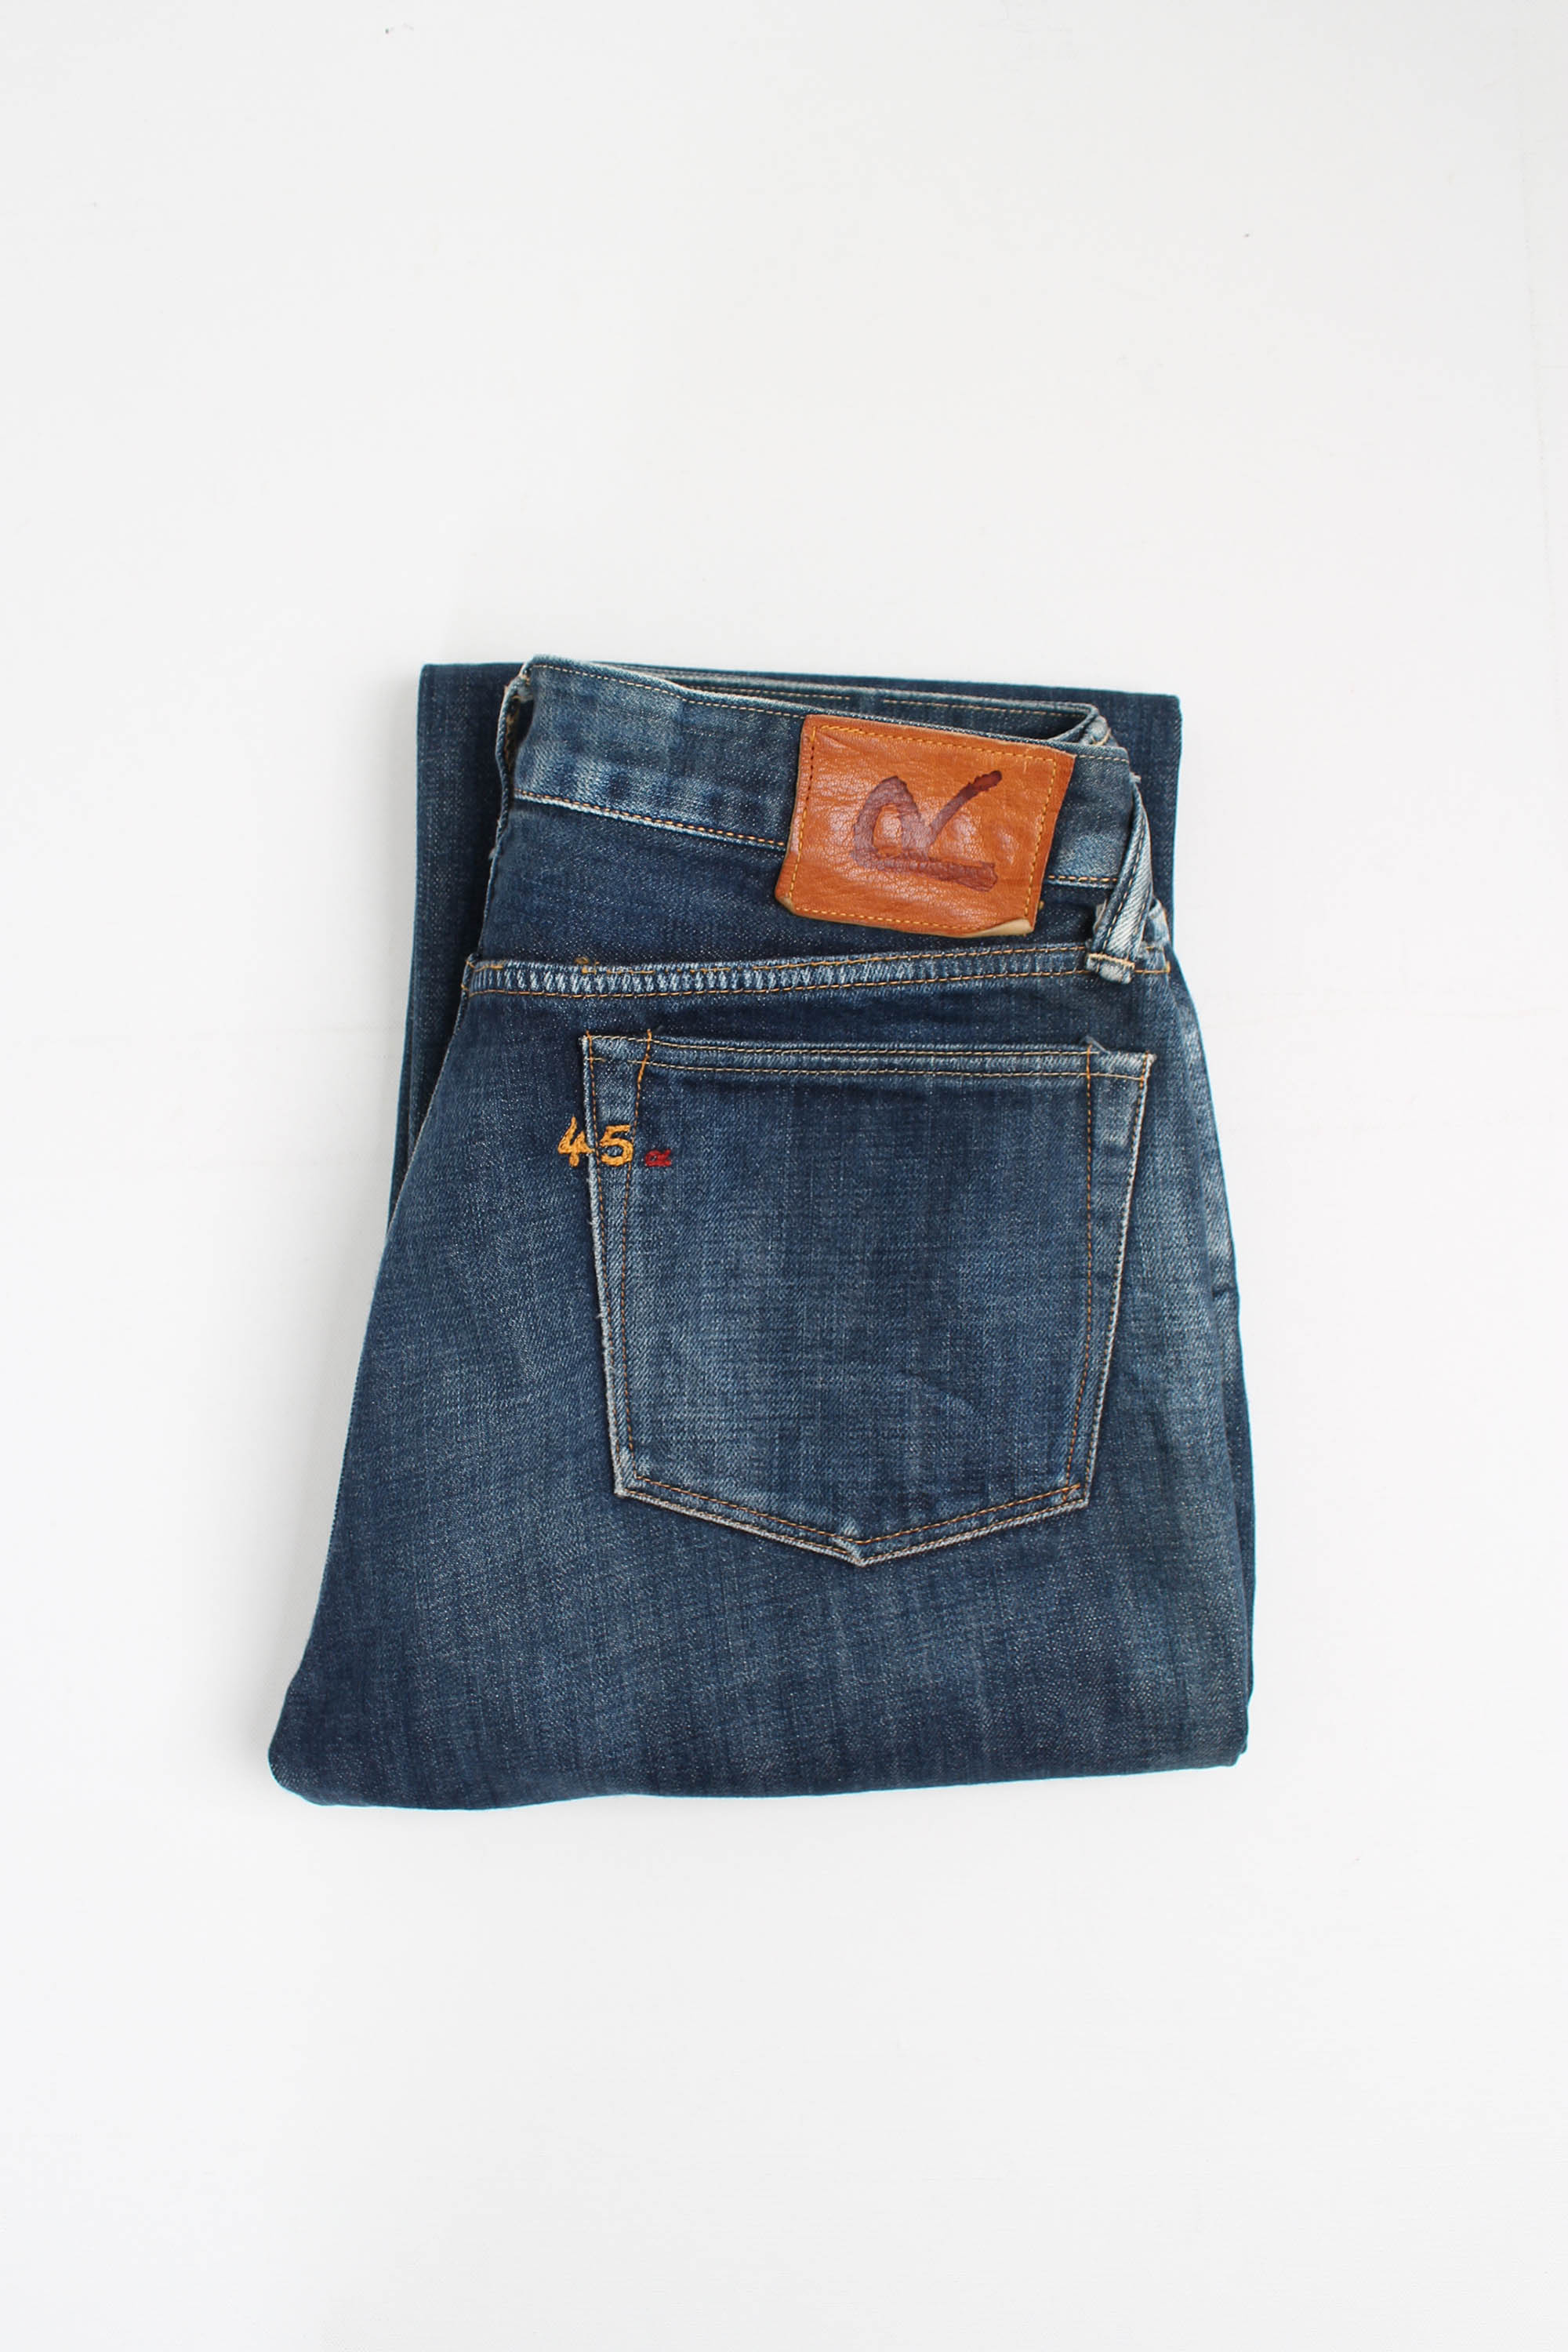 45R washed jean